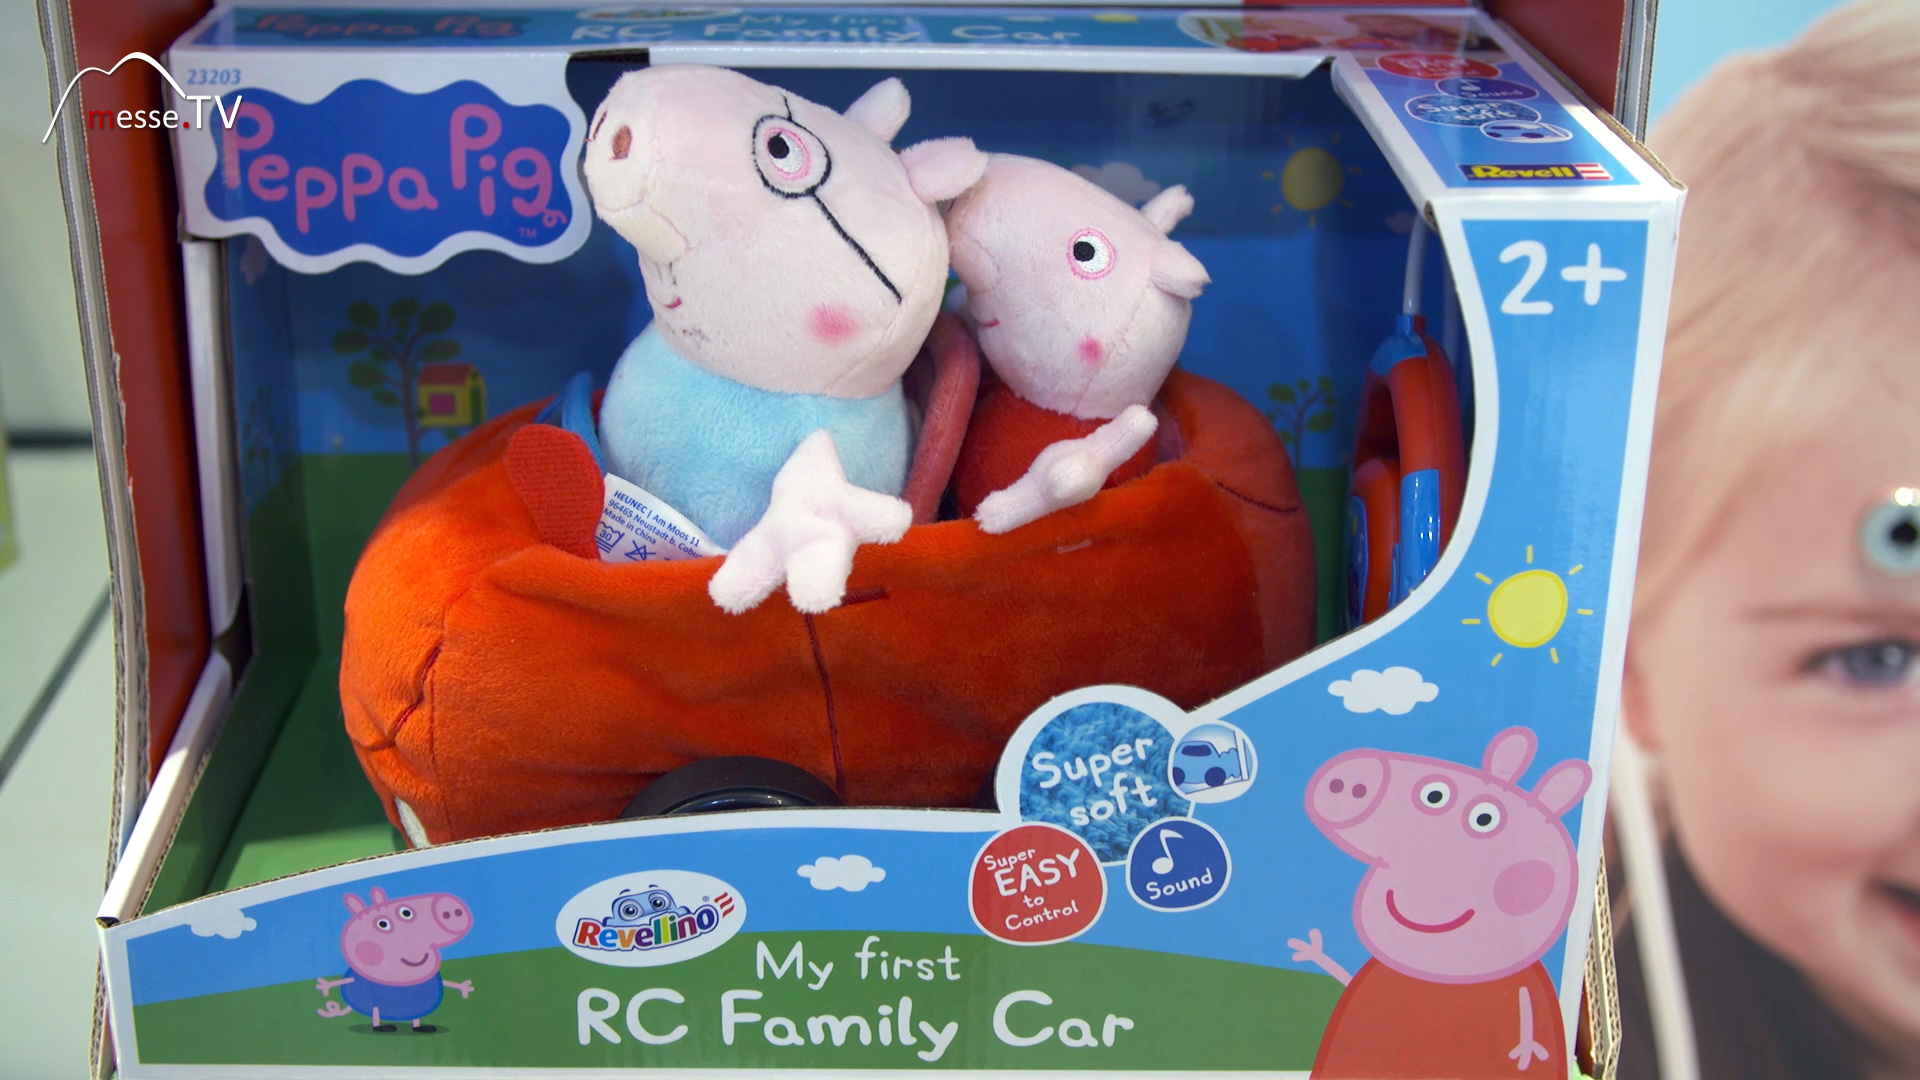 RC car made of plush with Peppa Pig cuddly toy